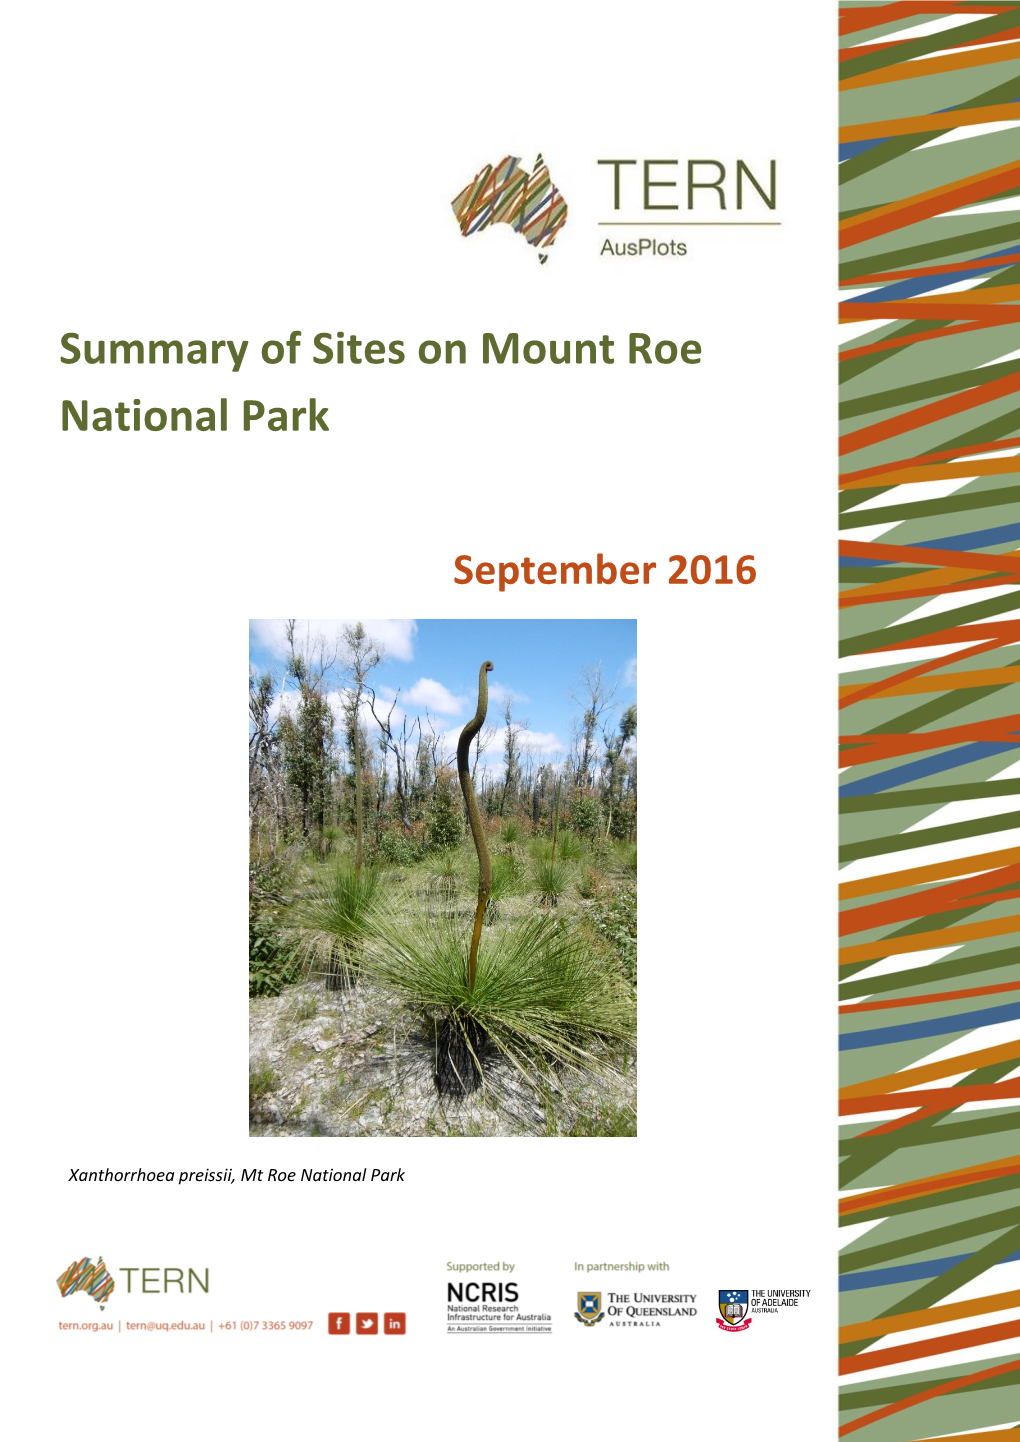 Summary of Sites on Mount Roe National Park